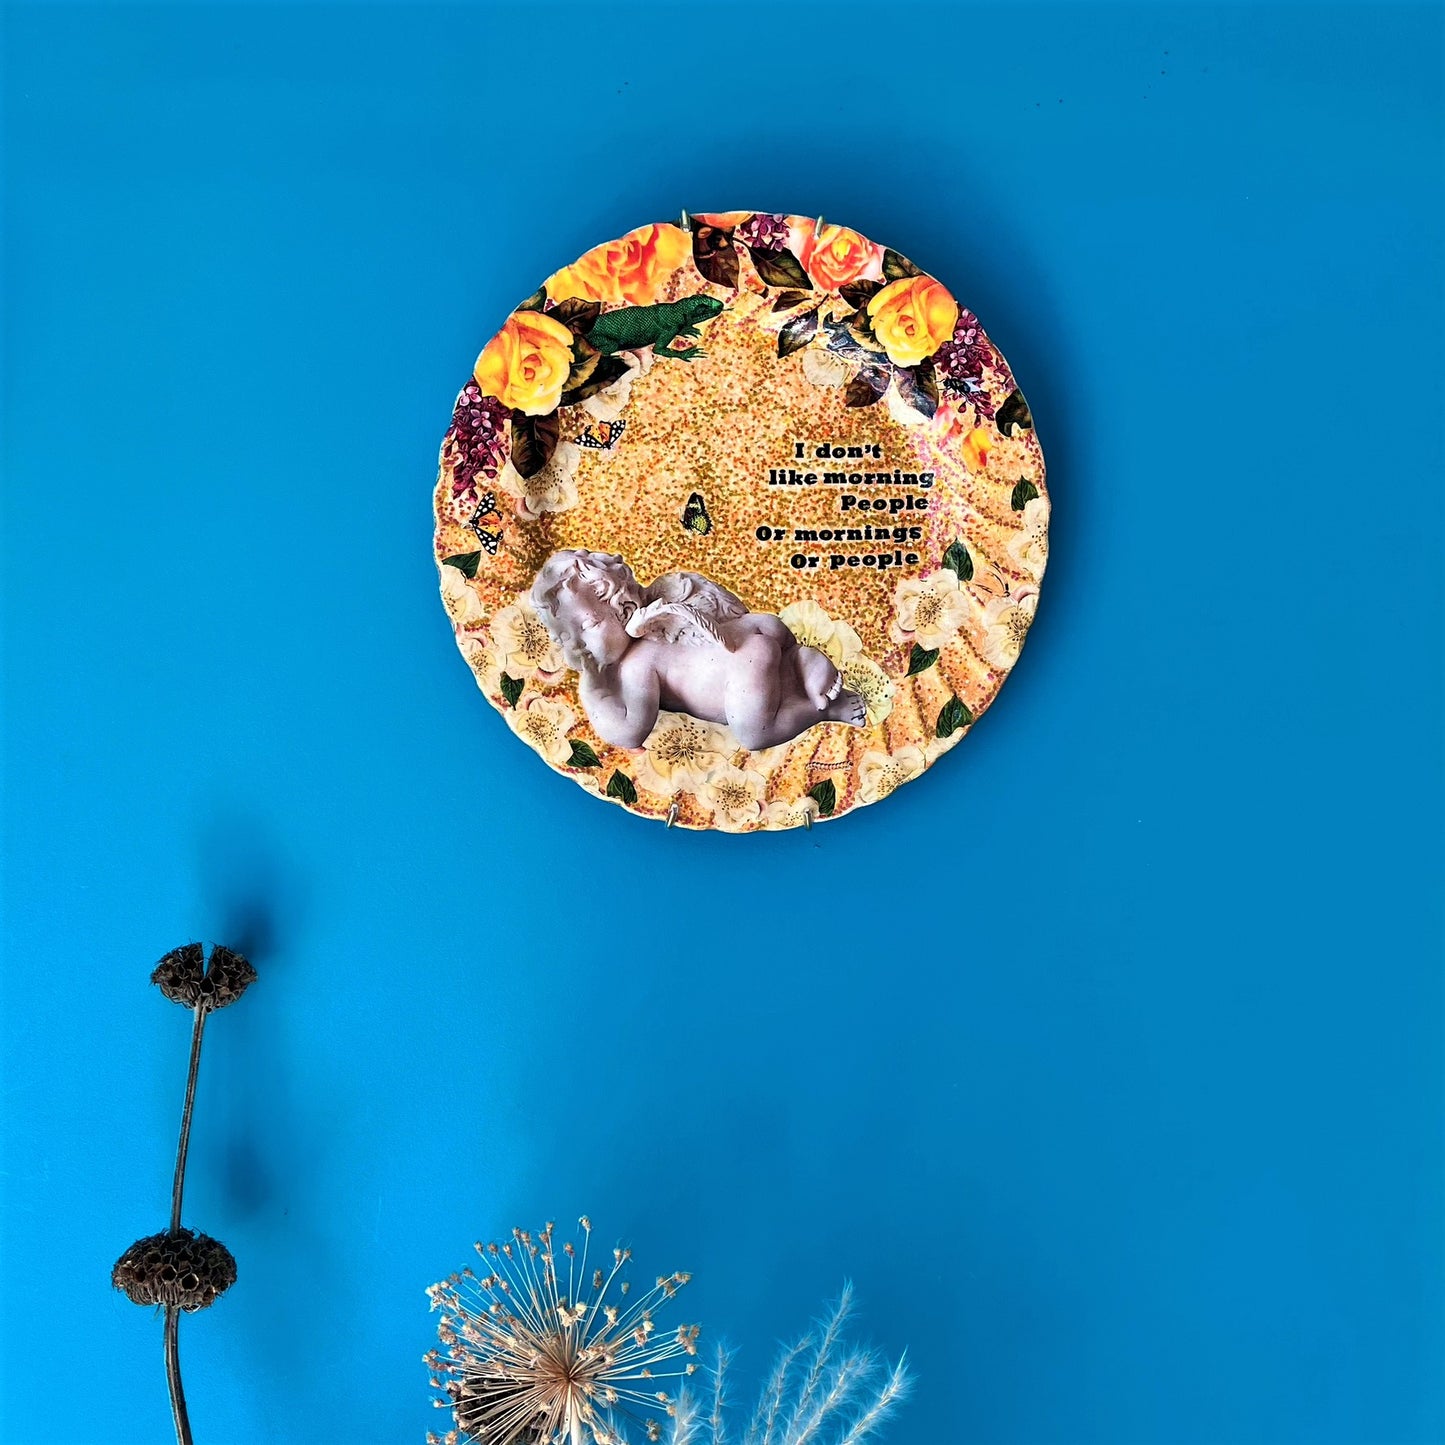 Gold Upcycled Wall Plate - "I Don't Like Morning People Or Mornings Or People" - by House of Frisson